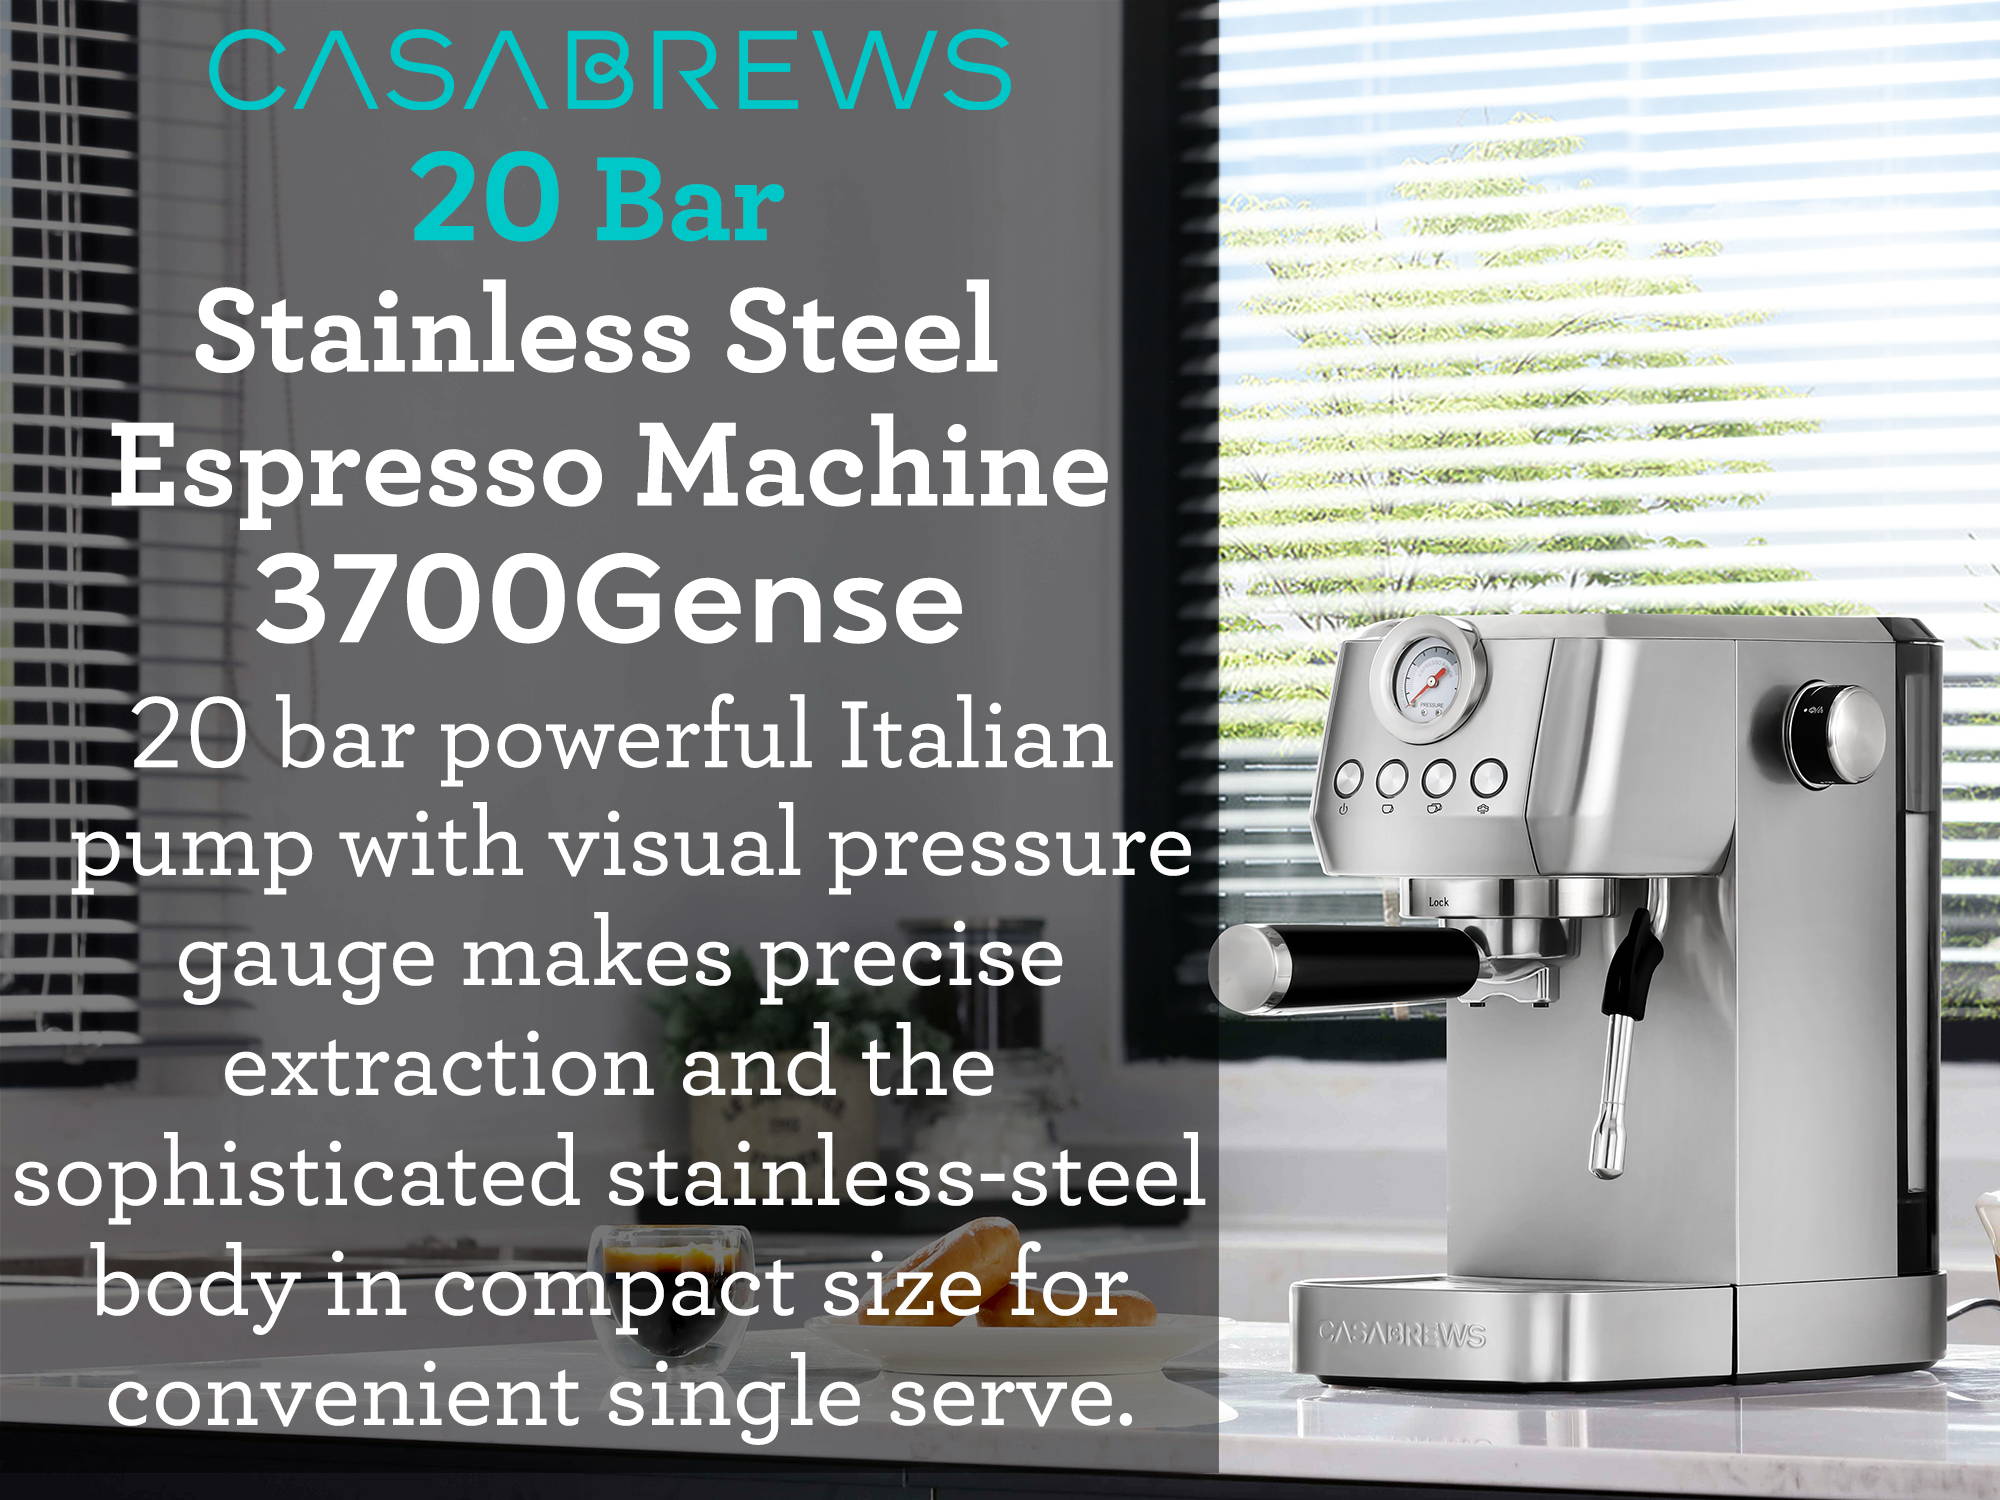 Sincreative professional 20 bar espresso machine semi-auto coffee machine perfect for home use enjoy cups of coffee at your favourite taste